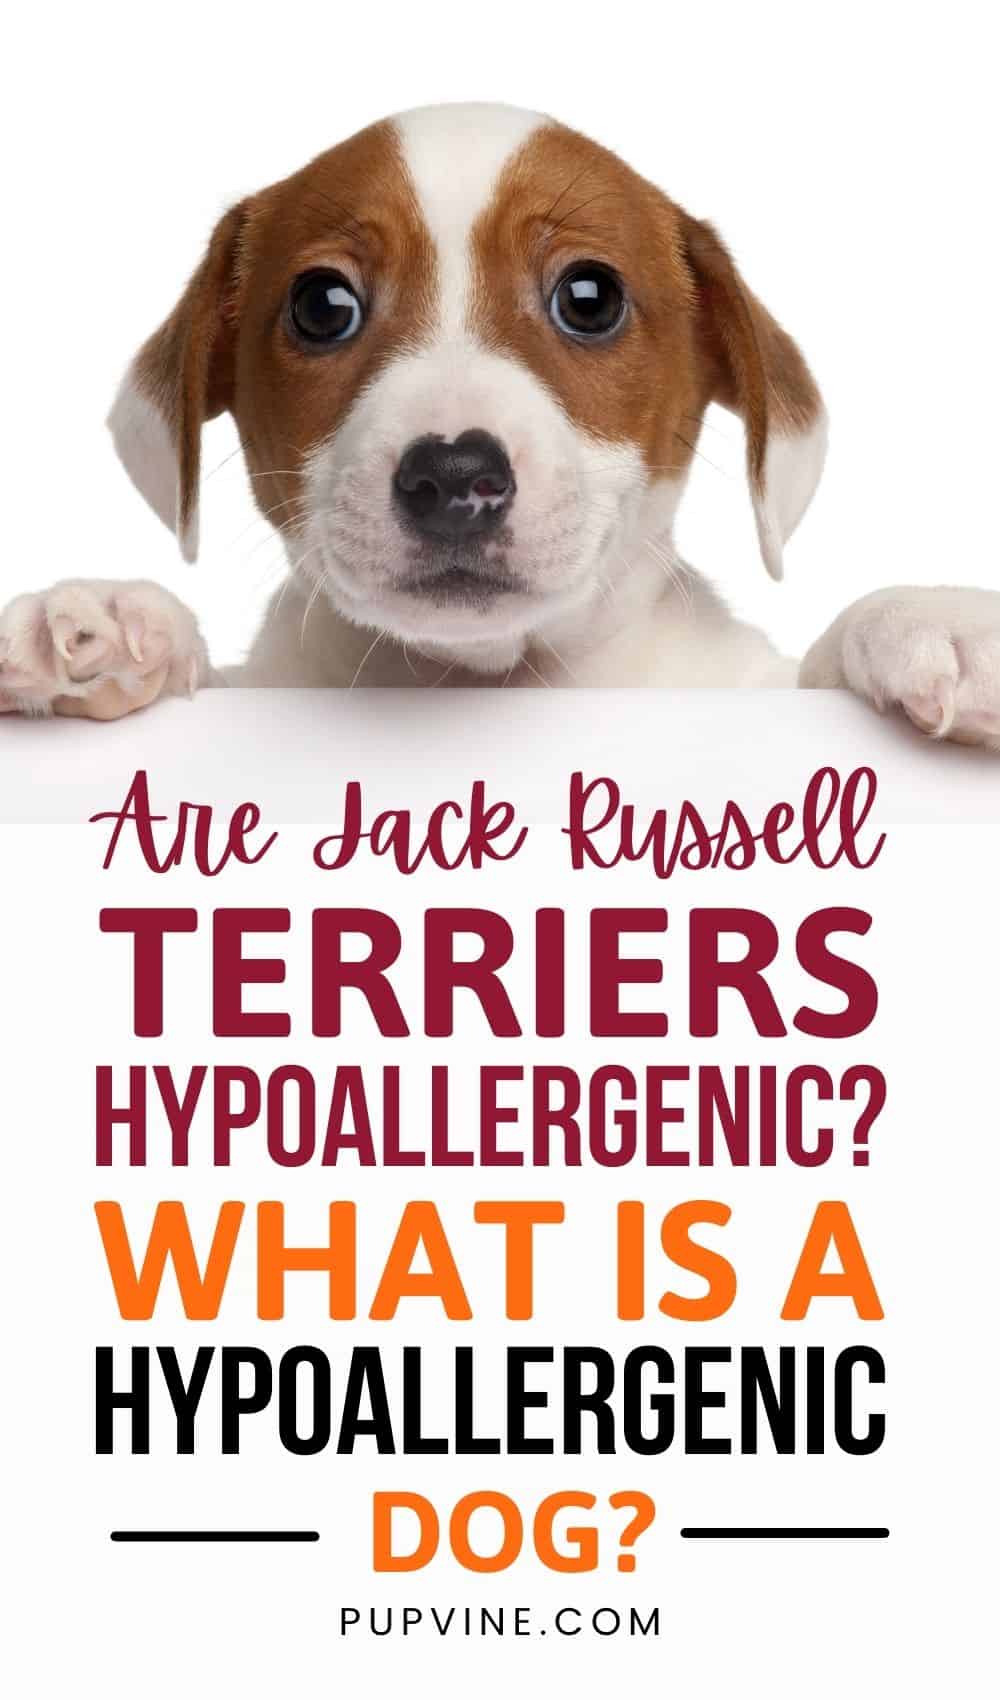 Are Jack Russell Terriers Hypoallergenic? What Is A Hypoallergenic Dog?